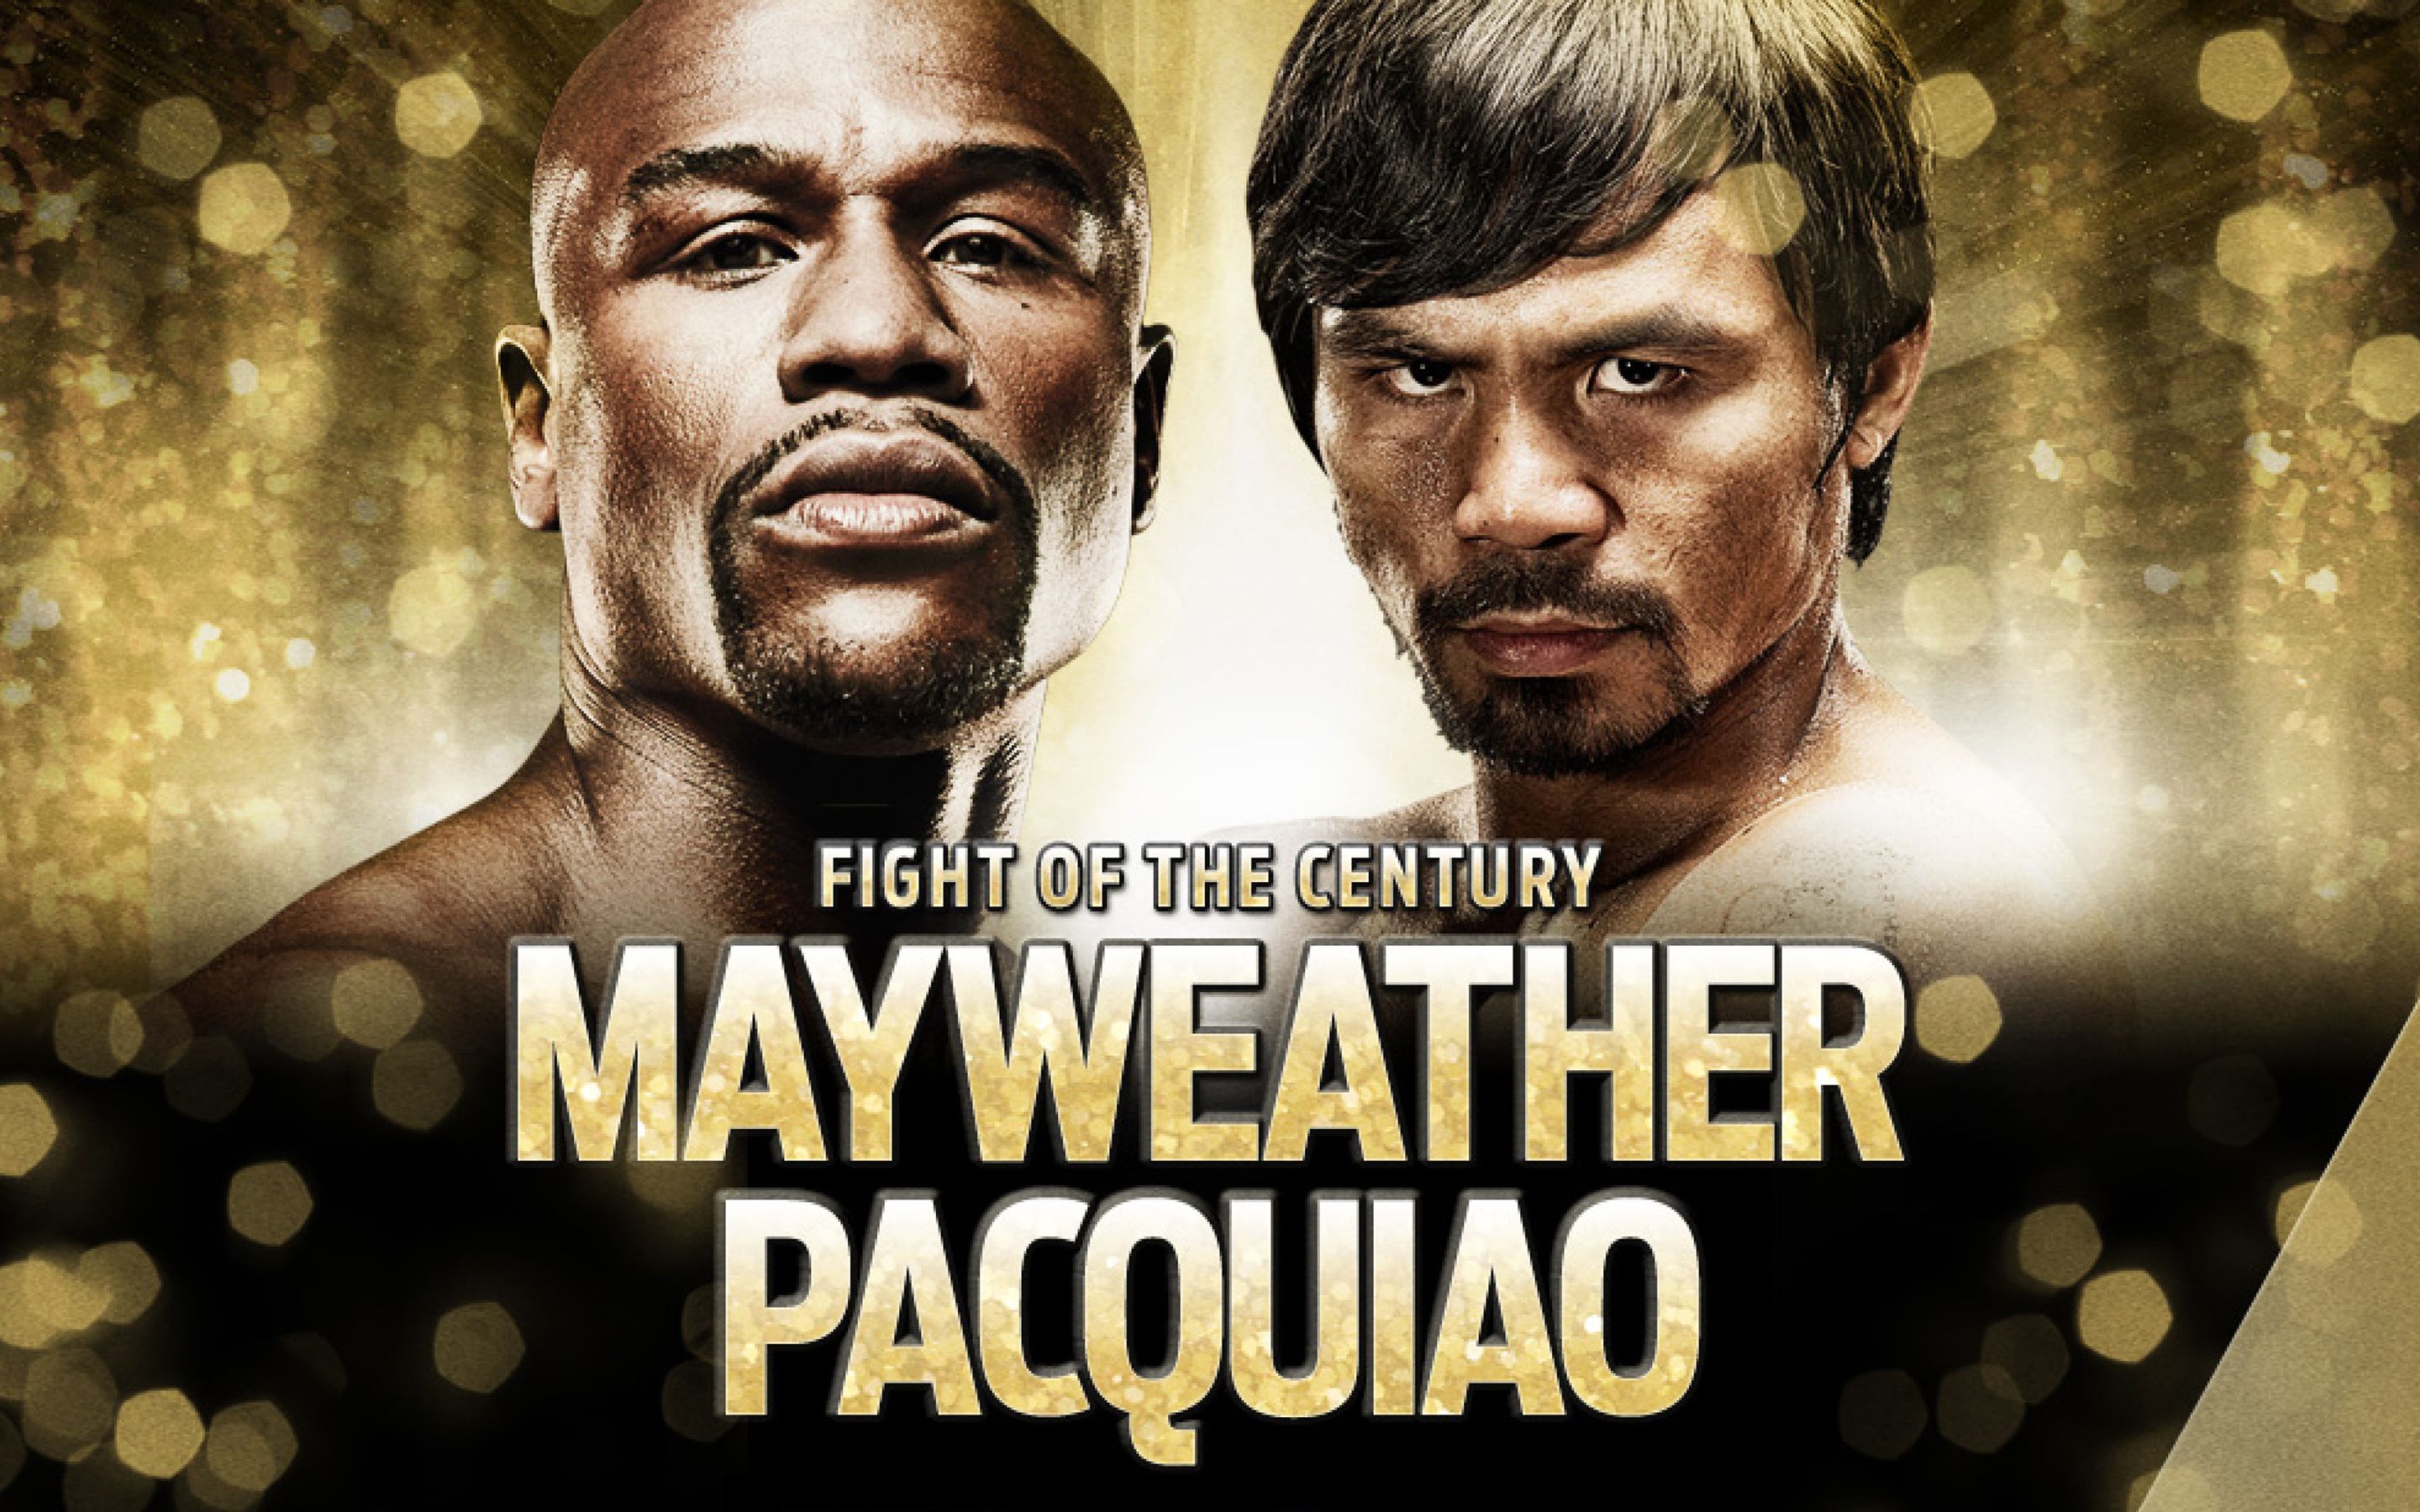 Manny Pacquiao vs Floyd Mayweather 2015 Fight of the Century Wallpaper